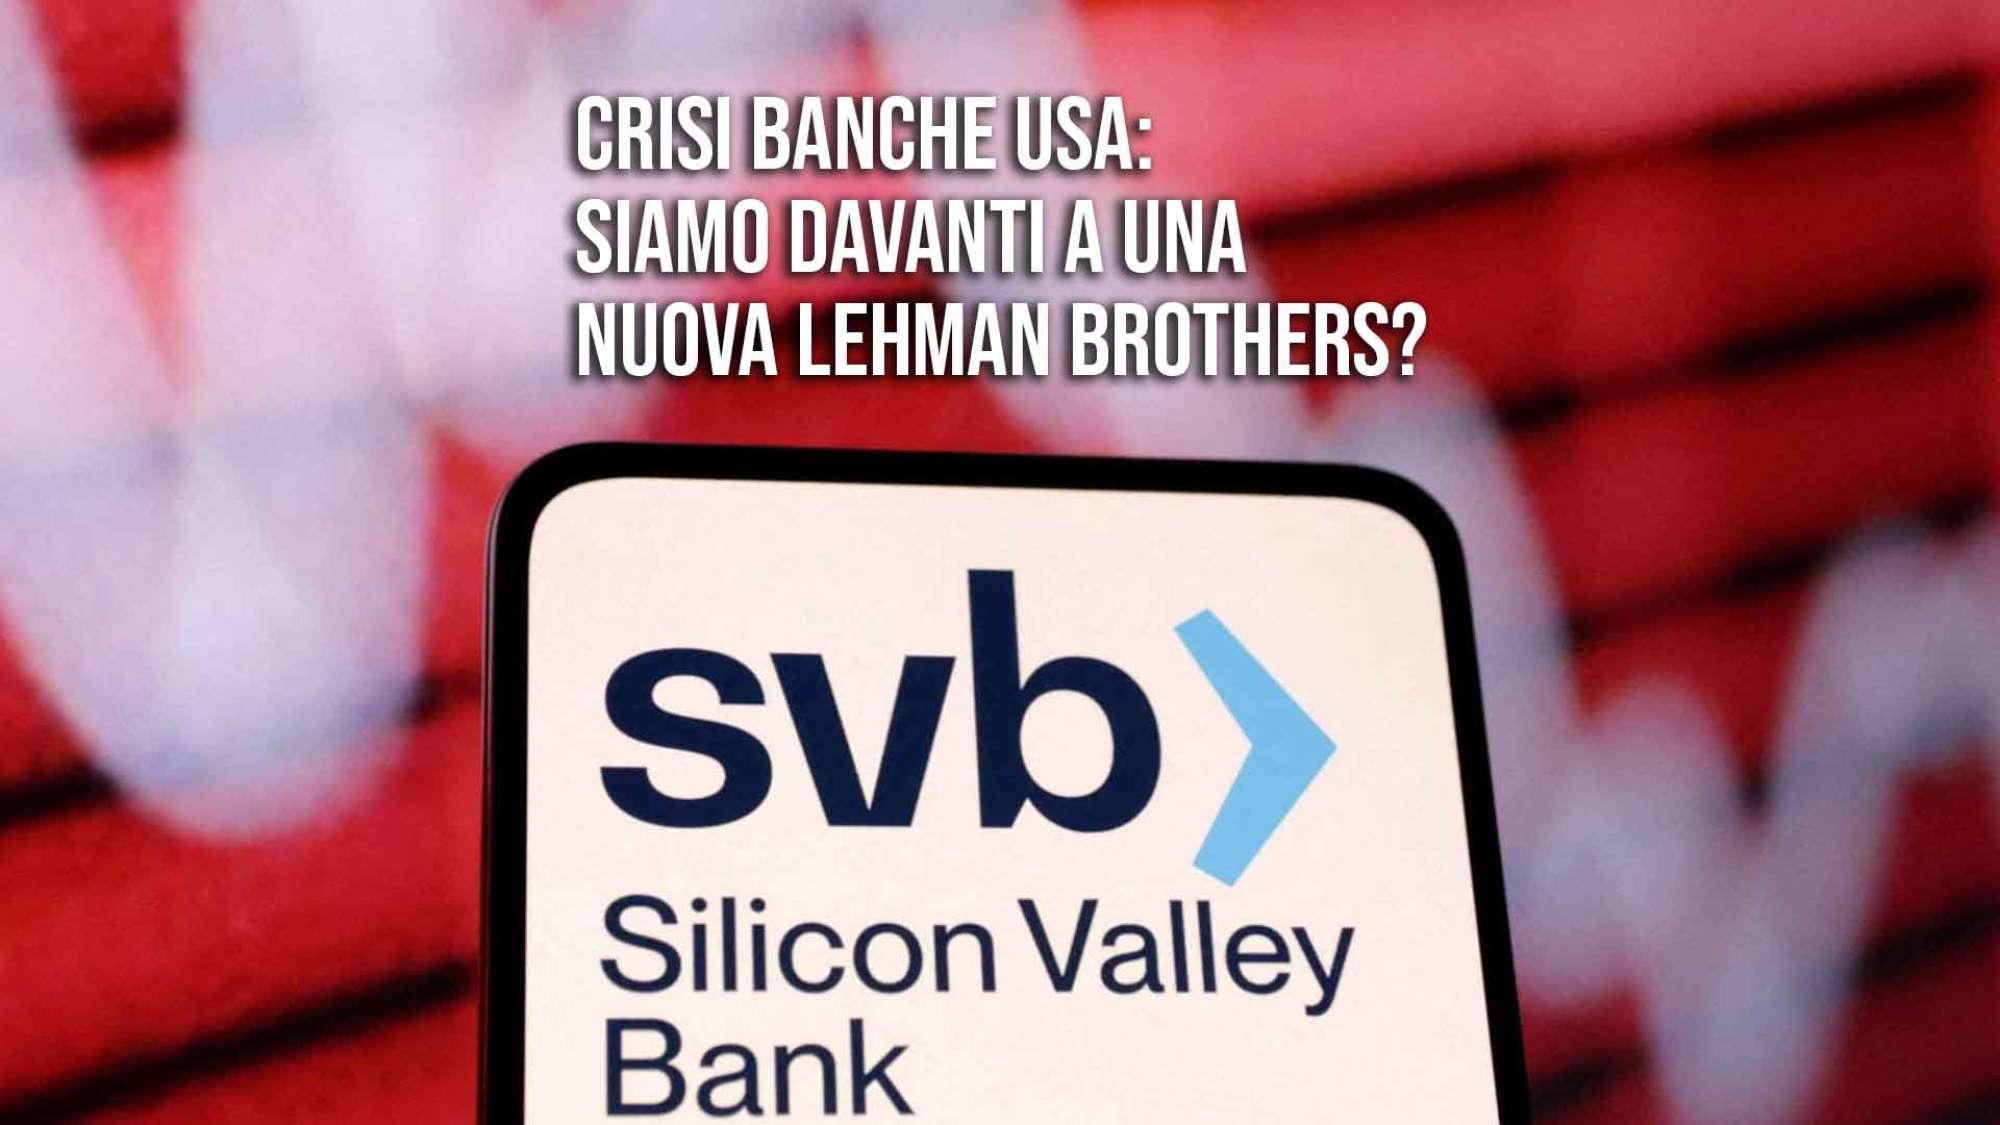 Crisi banche Usa: come Lehman Brothers?